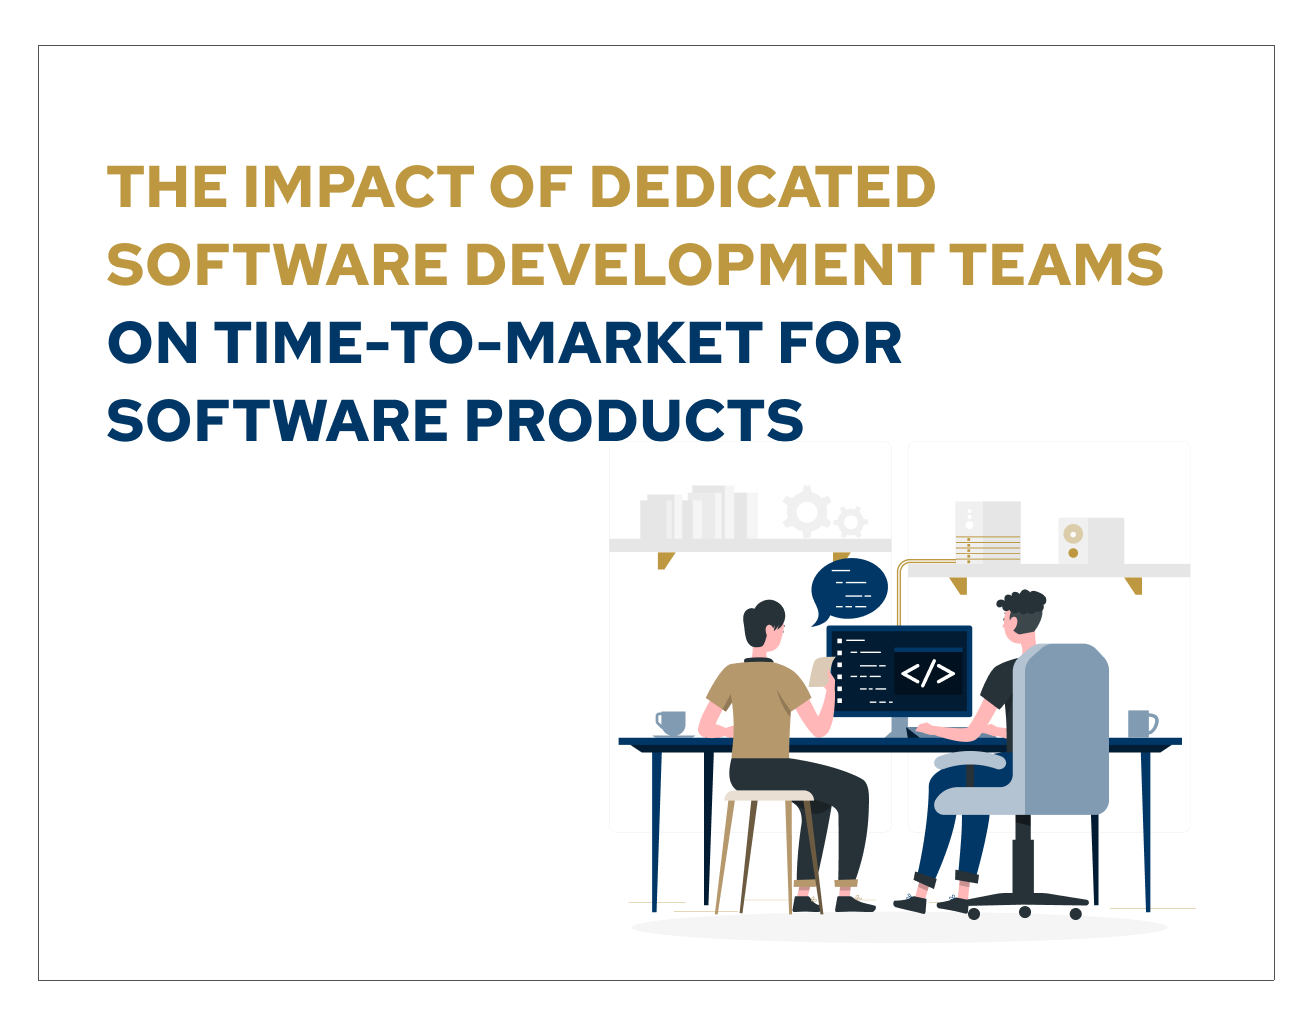 The Impact of Dedicated Software Development Teams on Time-to-Market for Software Products